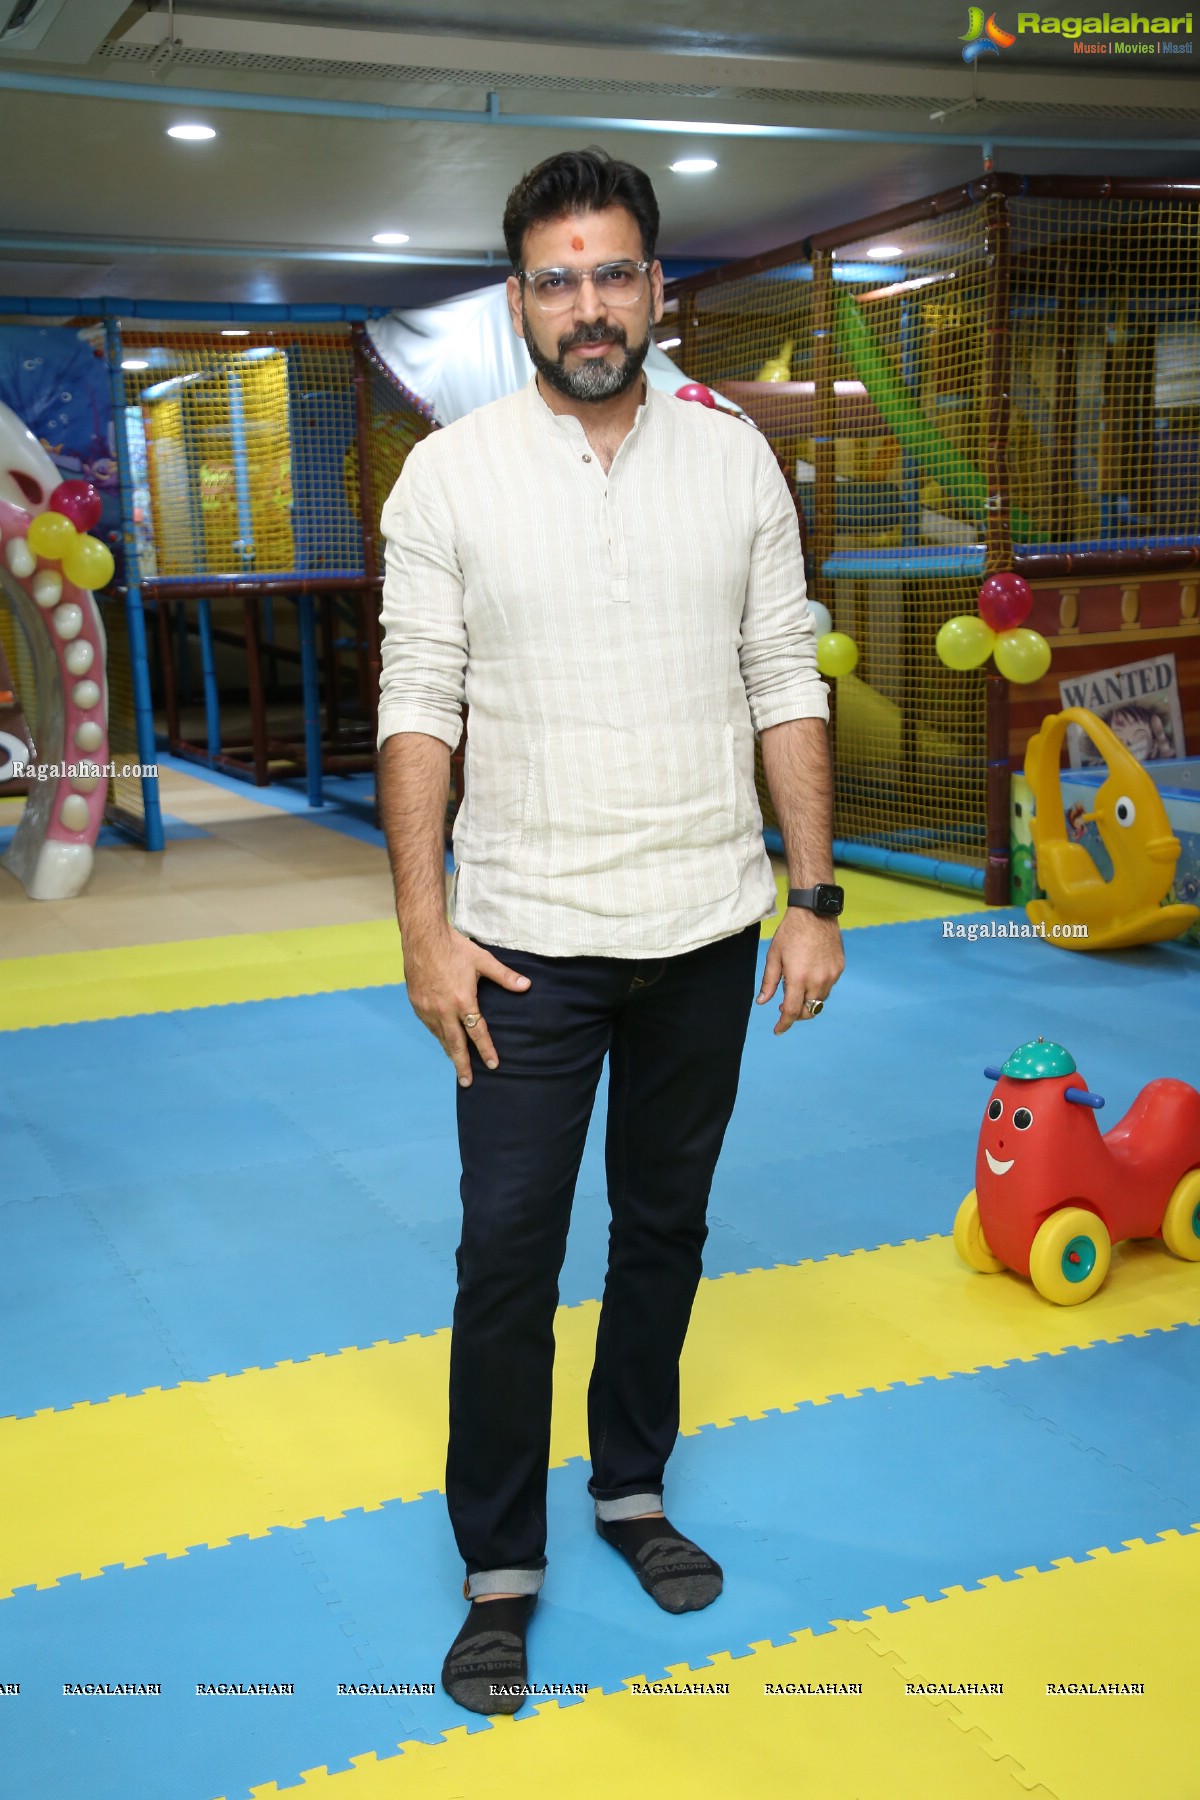 SIM & SAM's Party & Play-Town for Kids Launch at Madinaguda